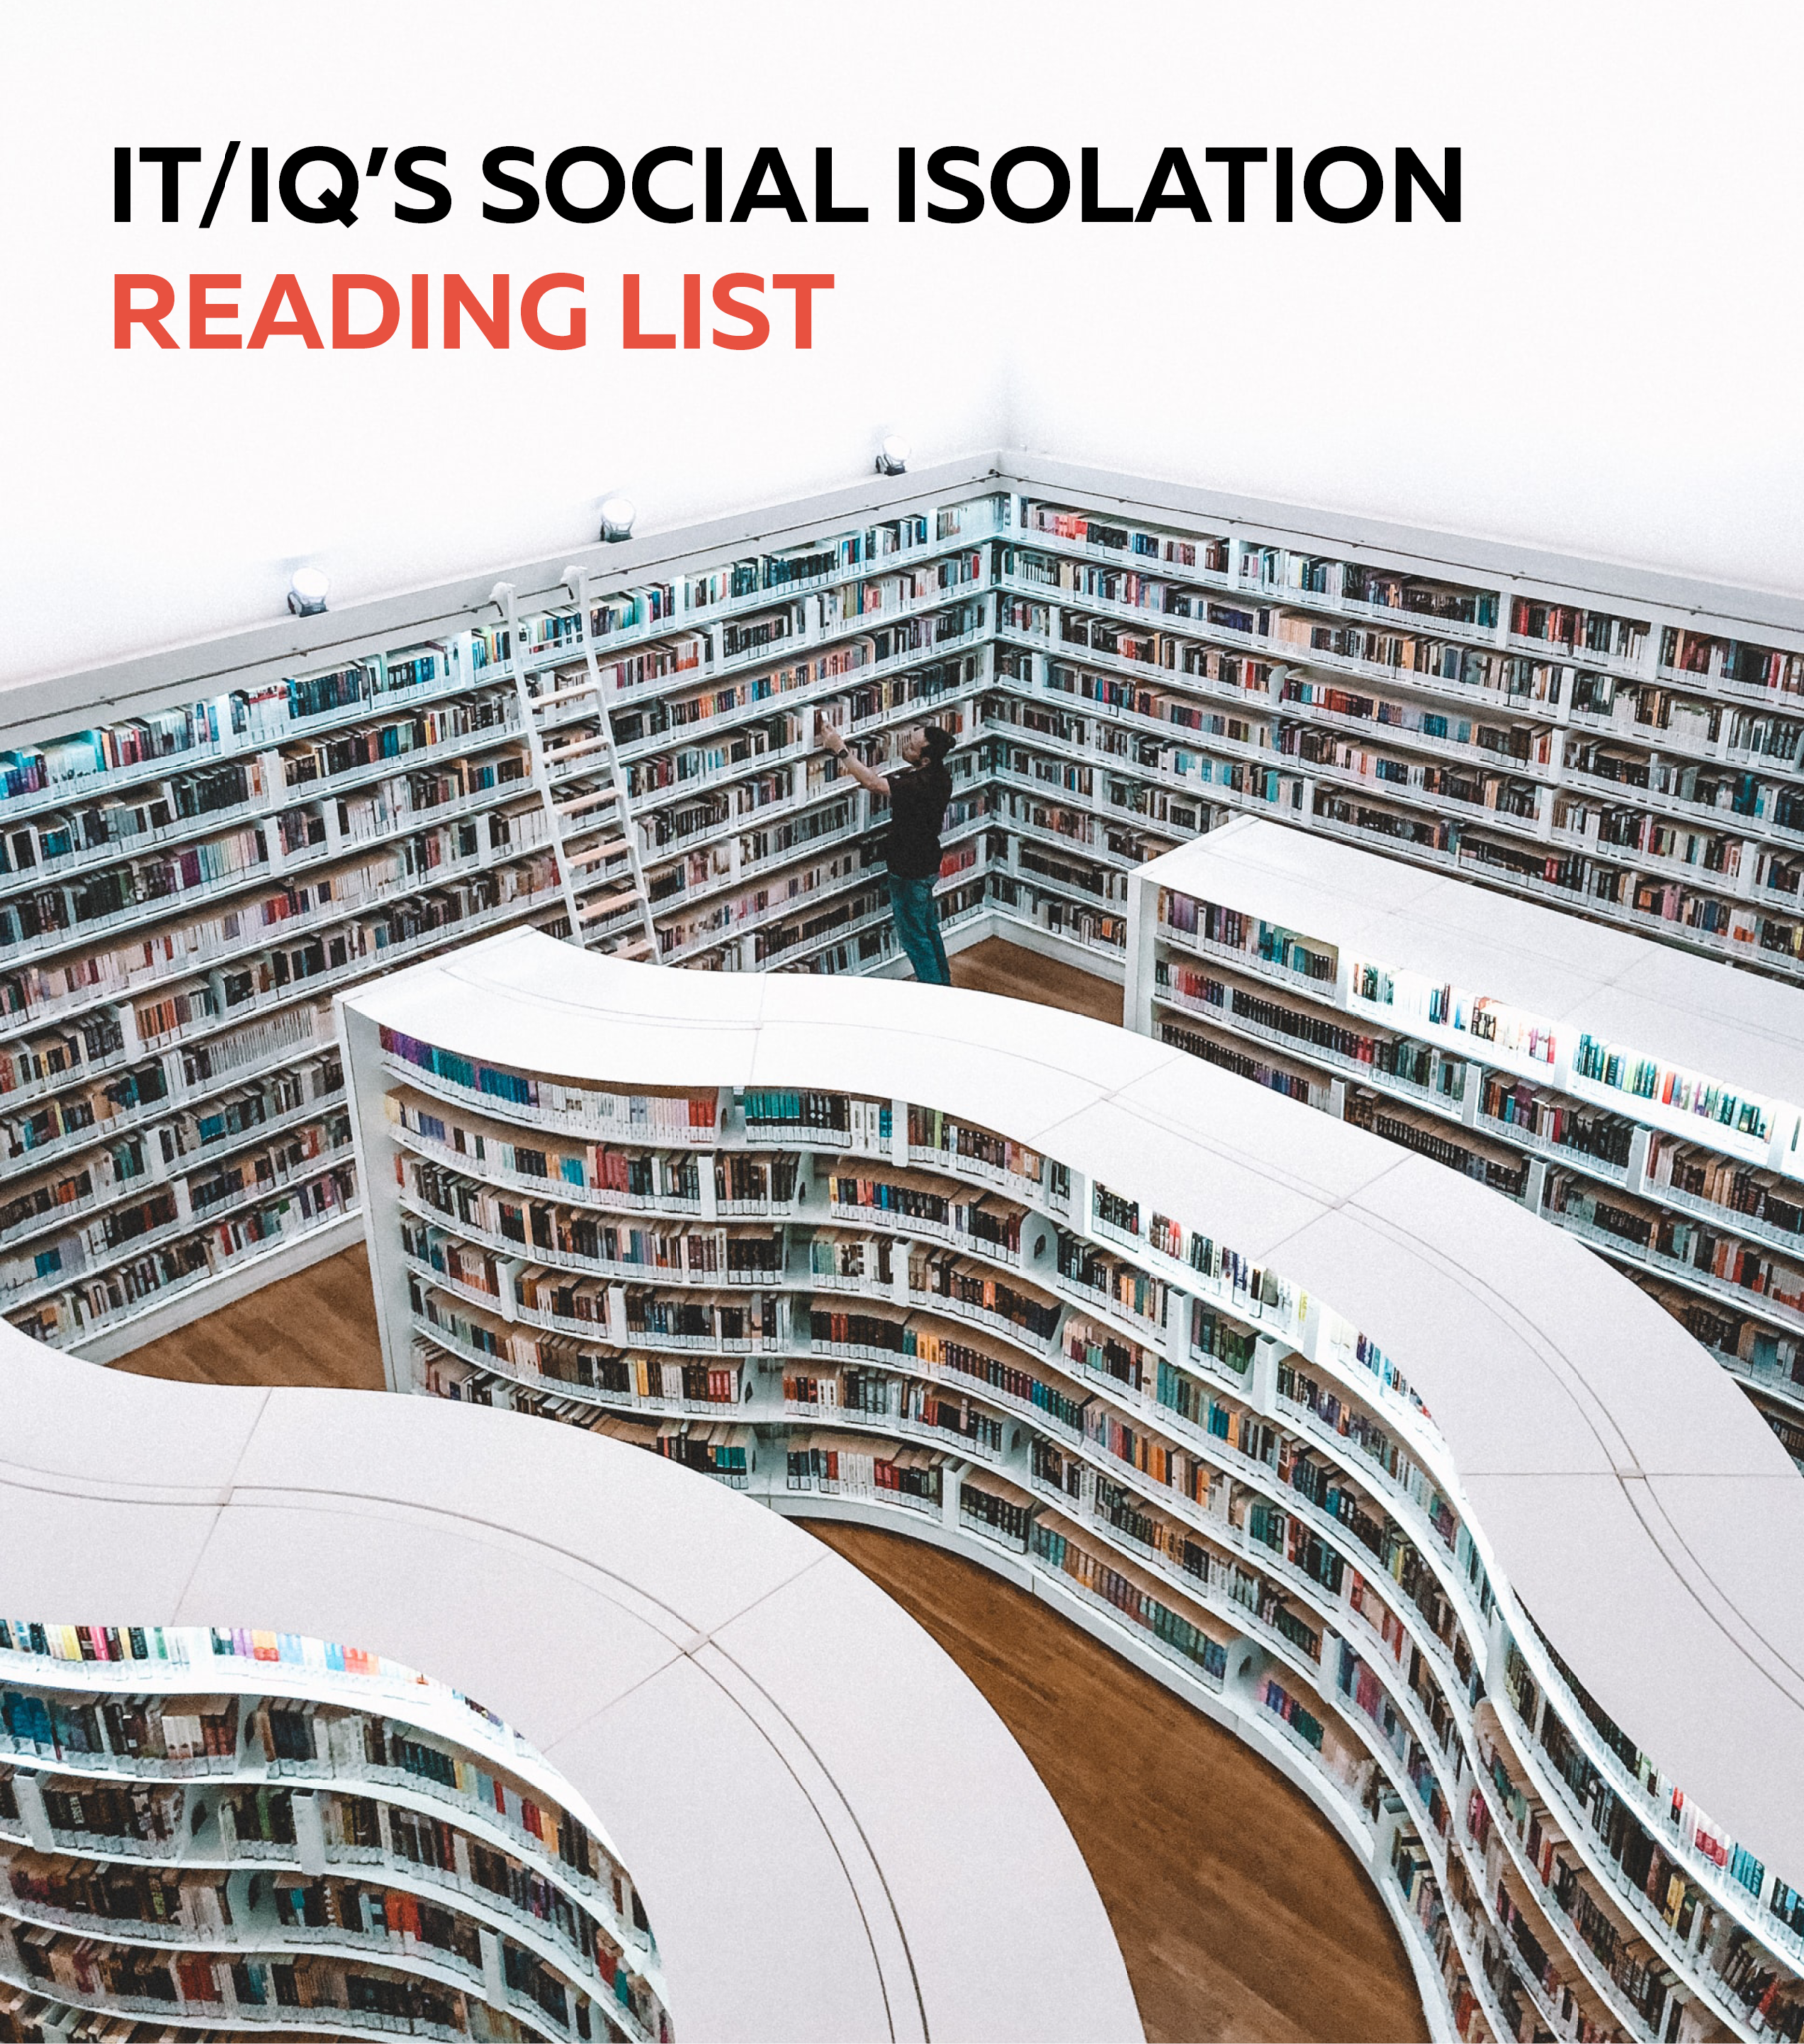 An image of a modern library with white shelfs with text IT/IQ's Social Isolation Reading List